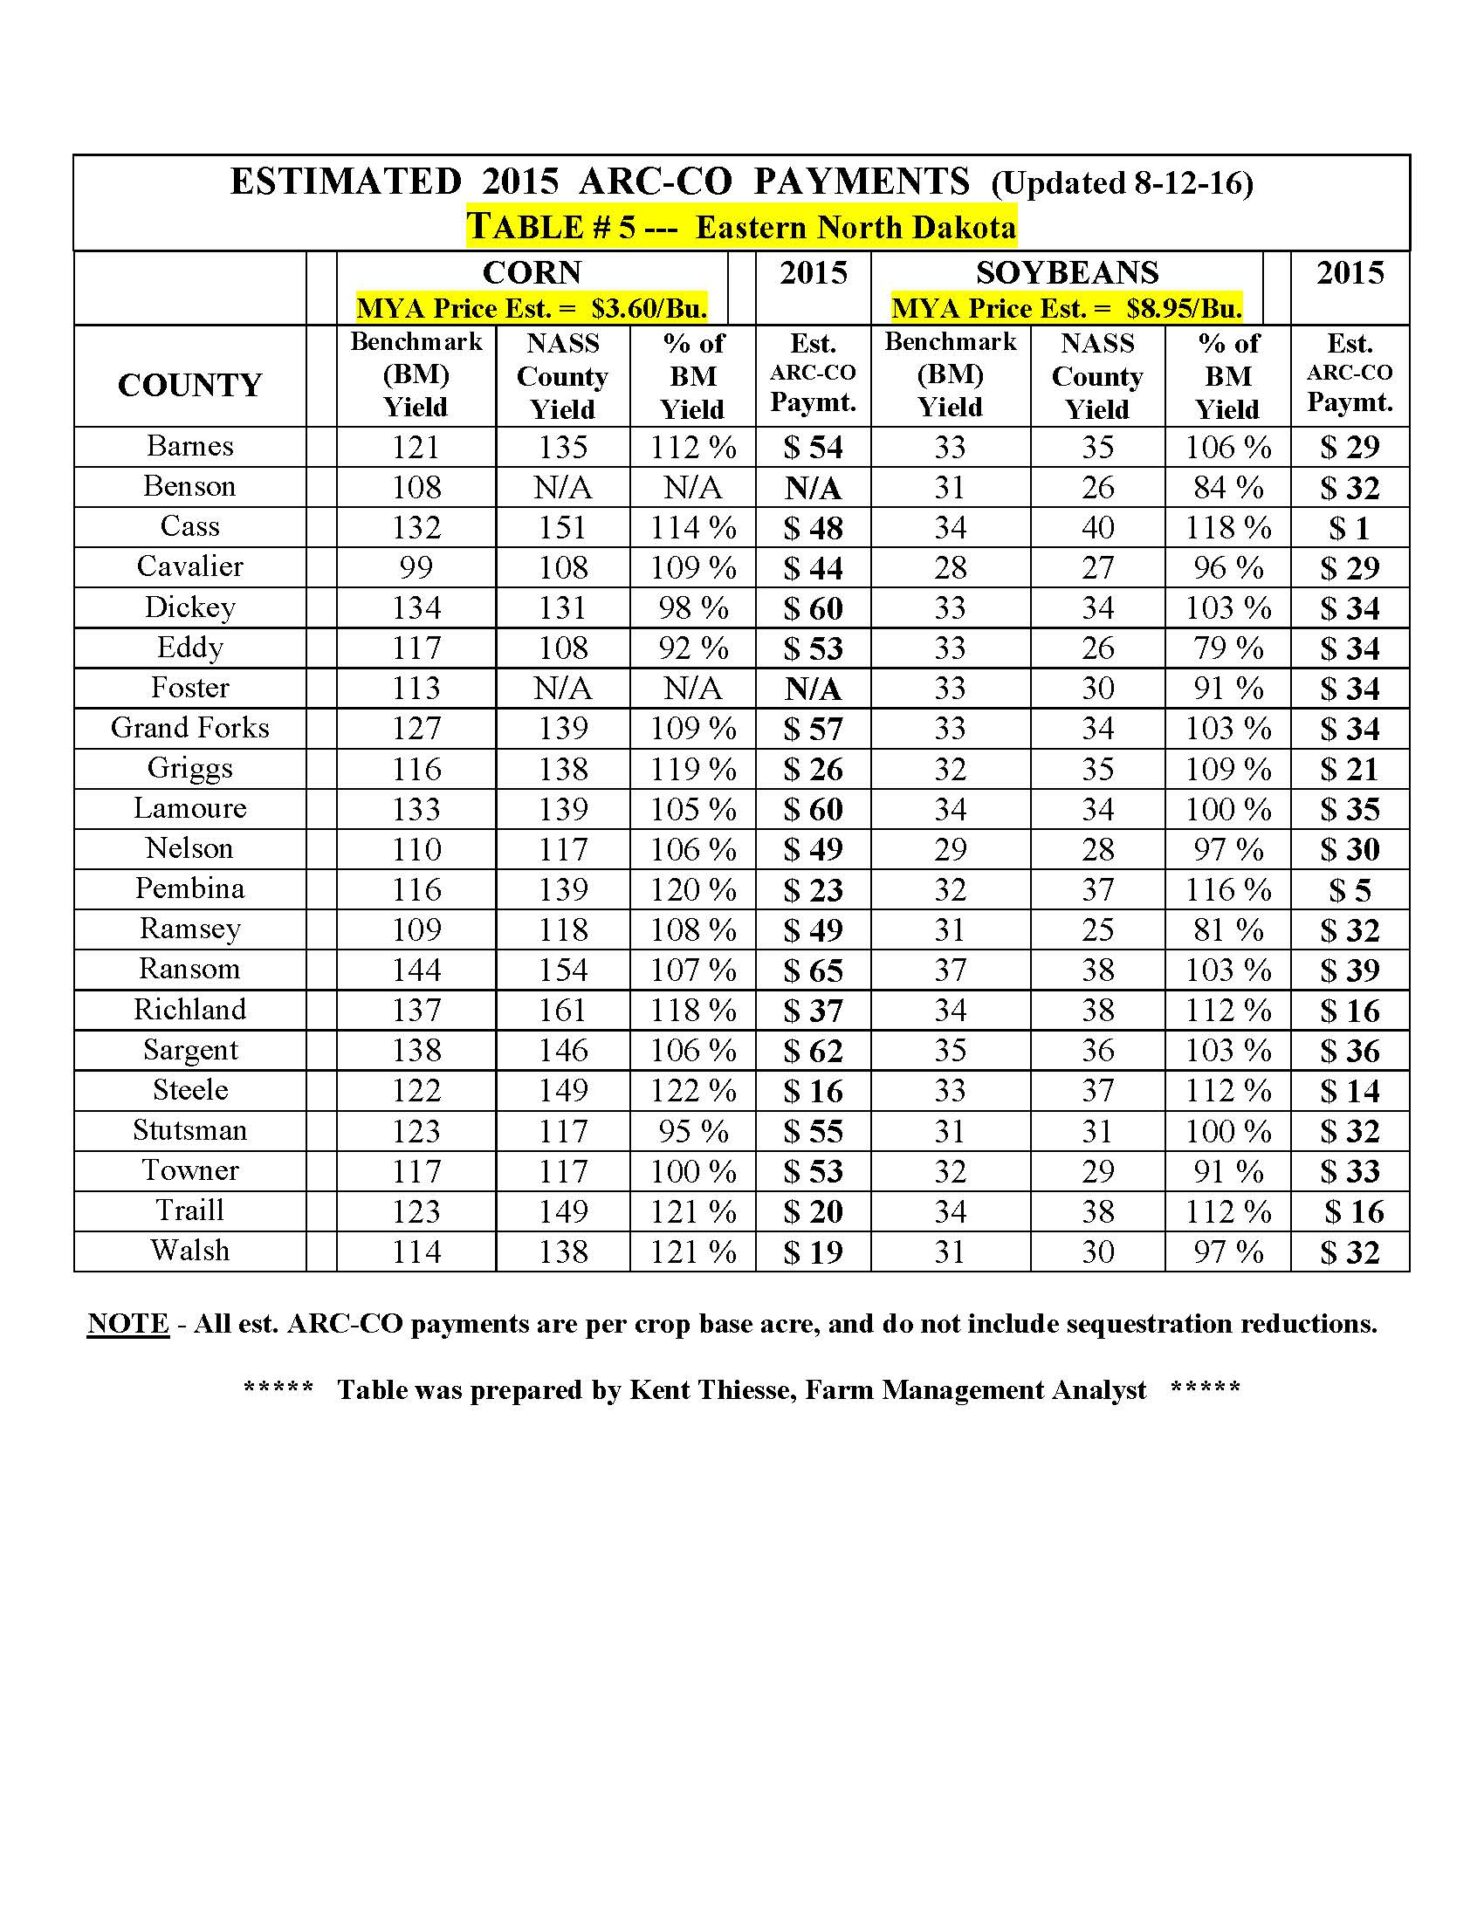 2015 ARC-CO PAYMENT TABLES (8-22-16)_Page_5